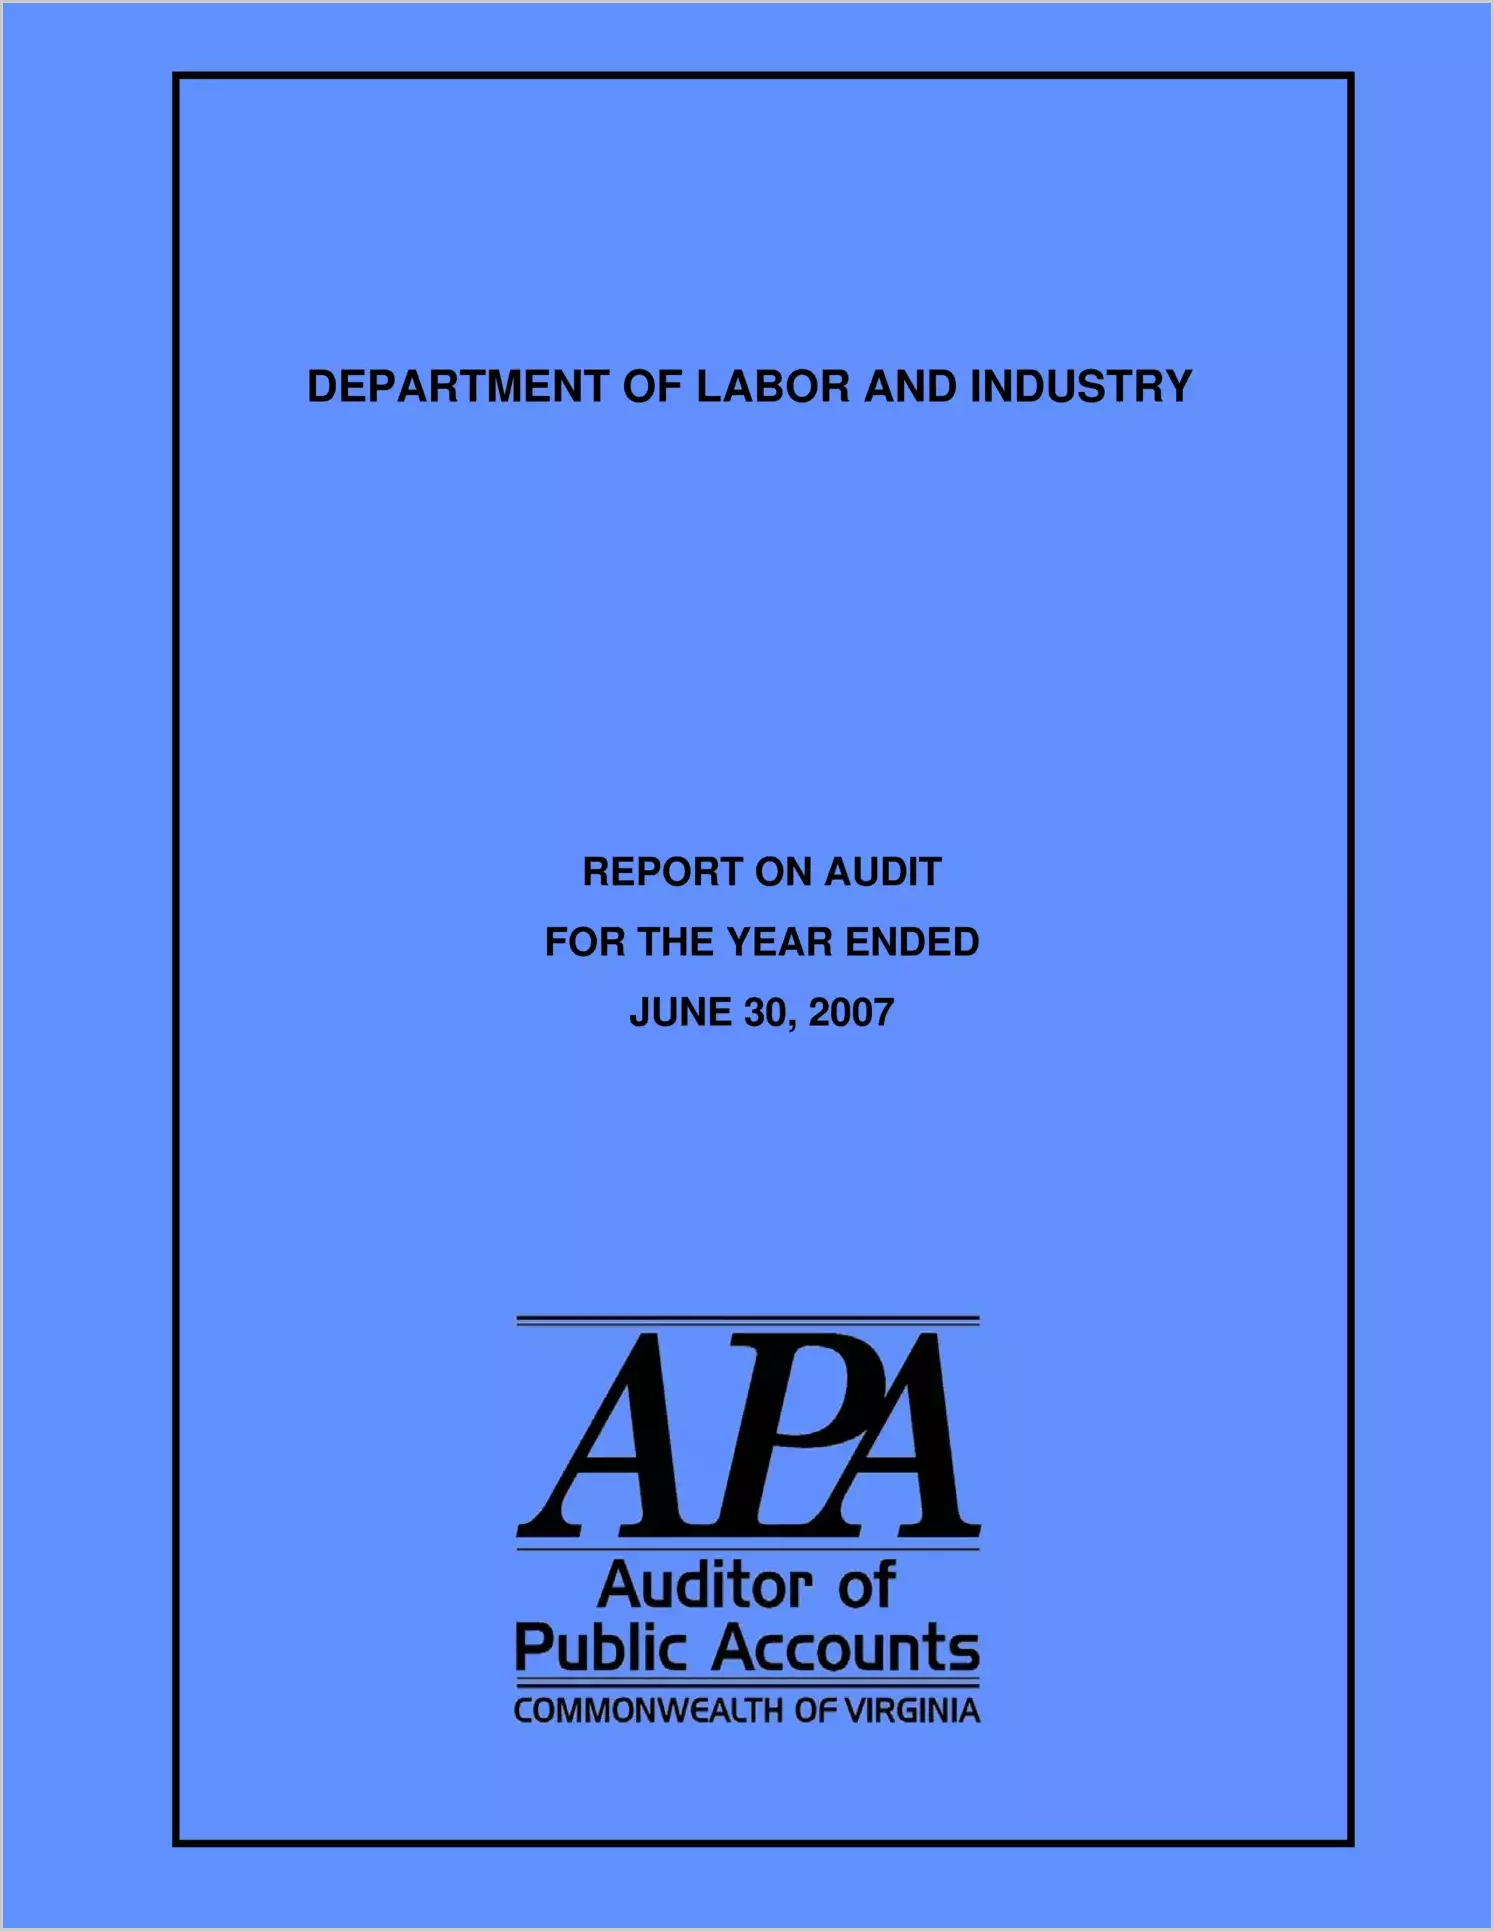 Department of Labor and Industry Report on Audit for the year ended June 30, 2007